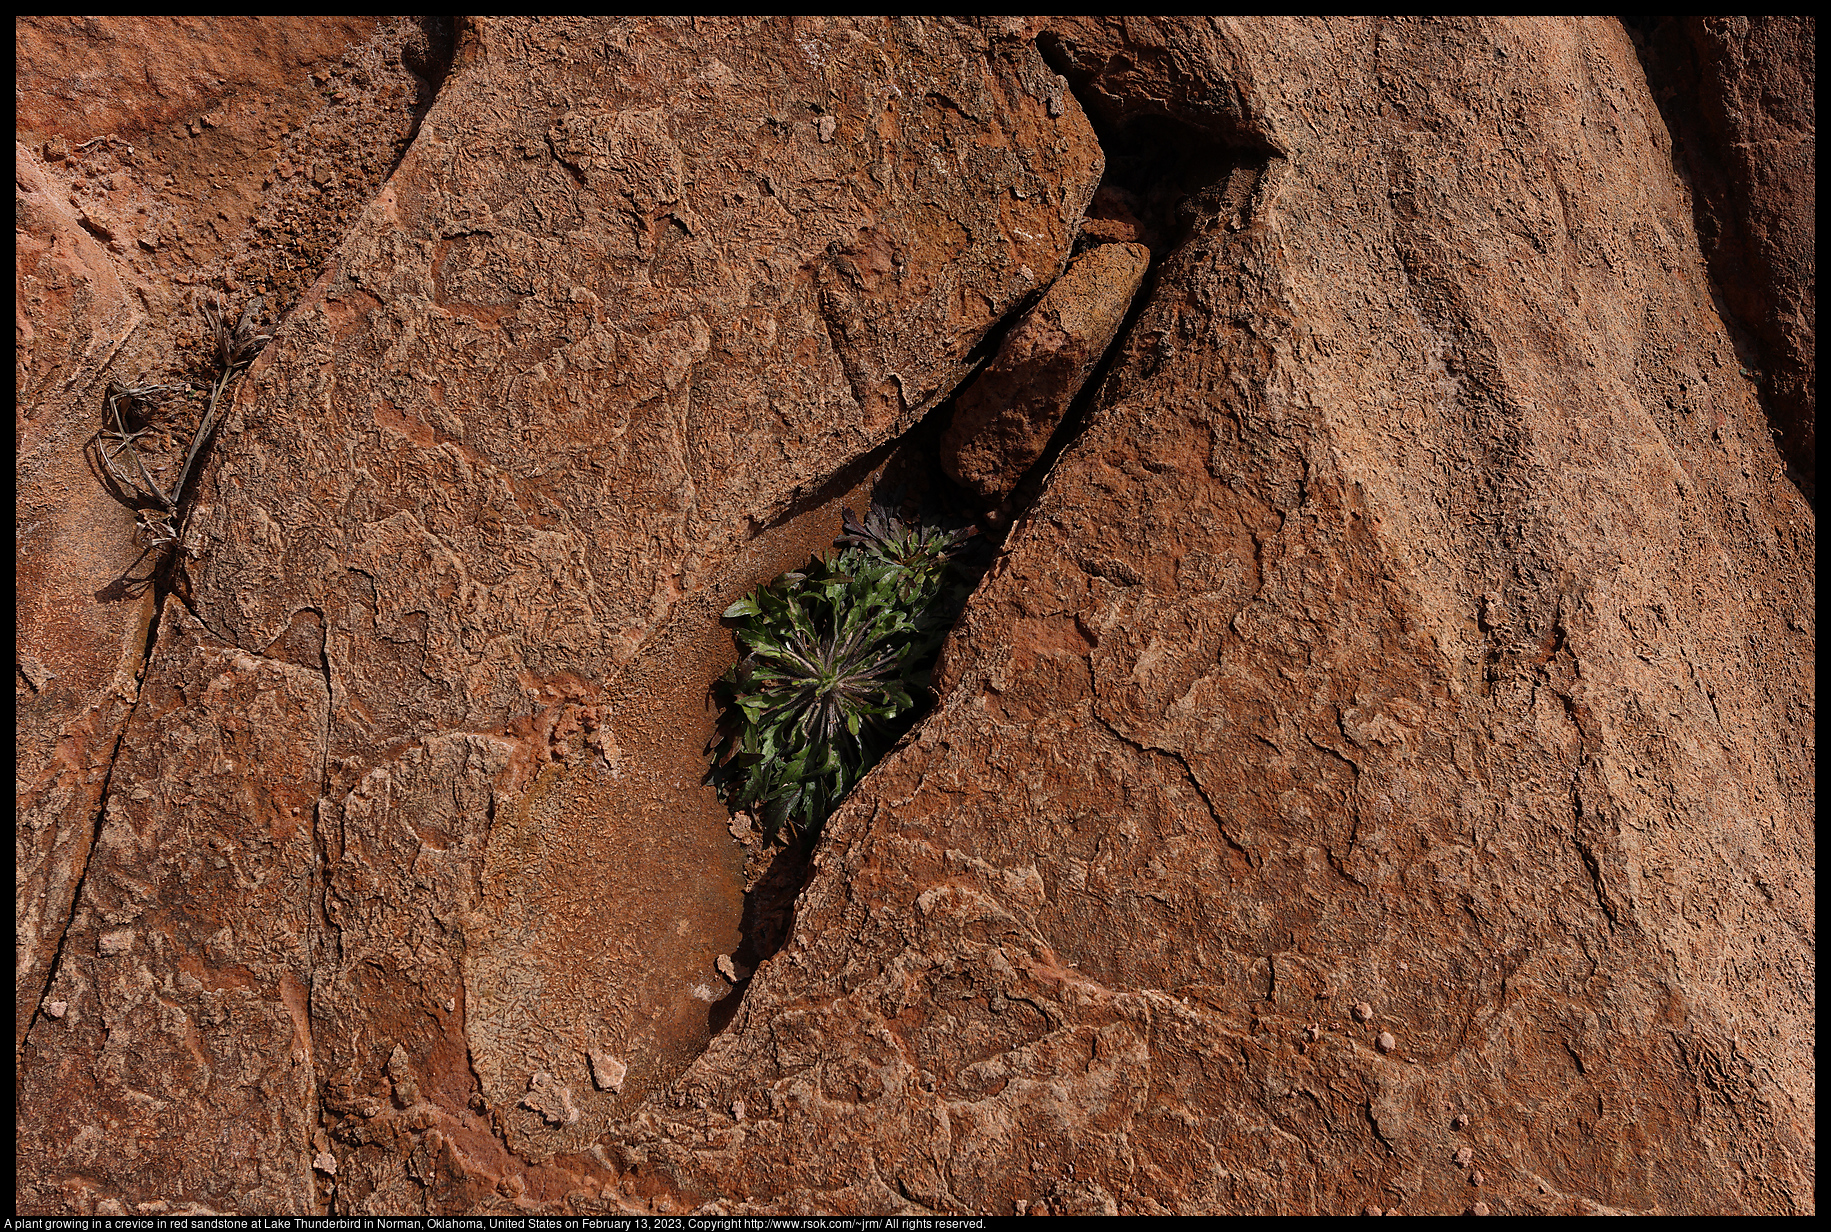 A plant growing in a crevice in red sandstone at Lake Thunderbird in Norman, Oklahoma, United States on February 13, 2023